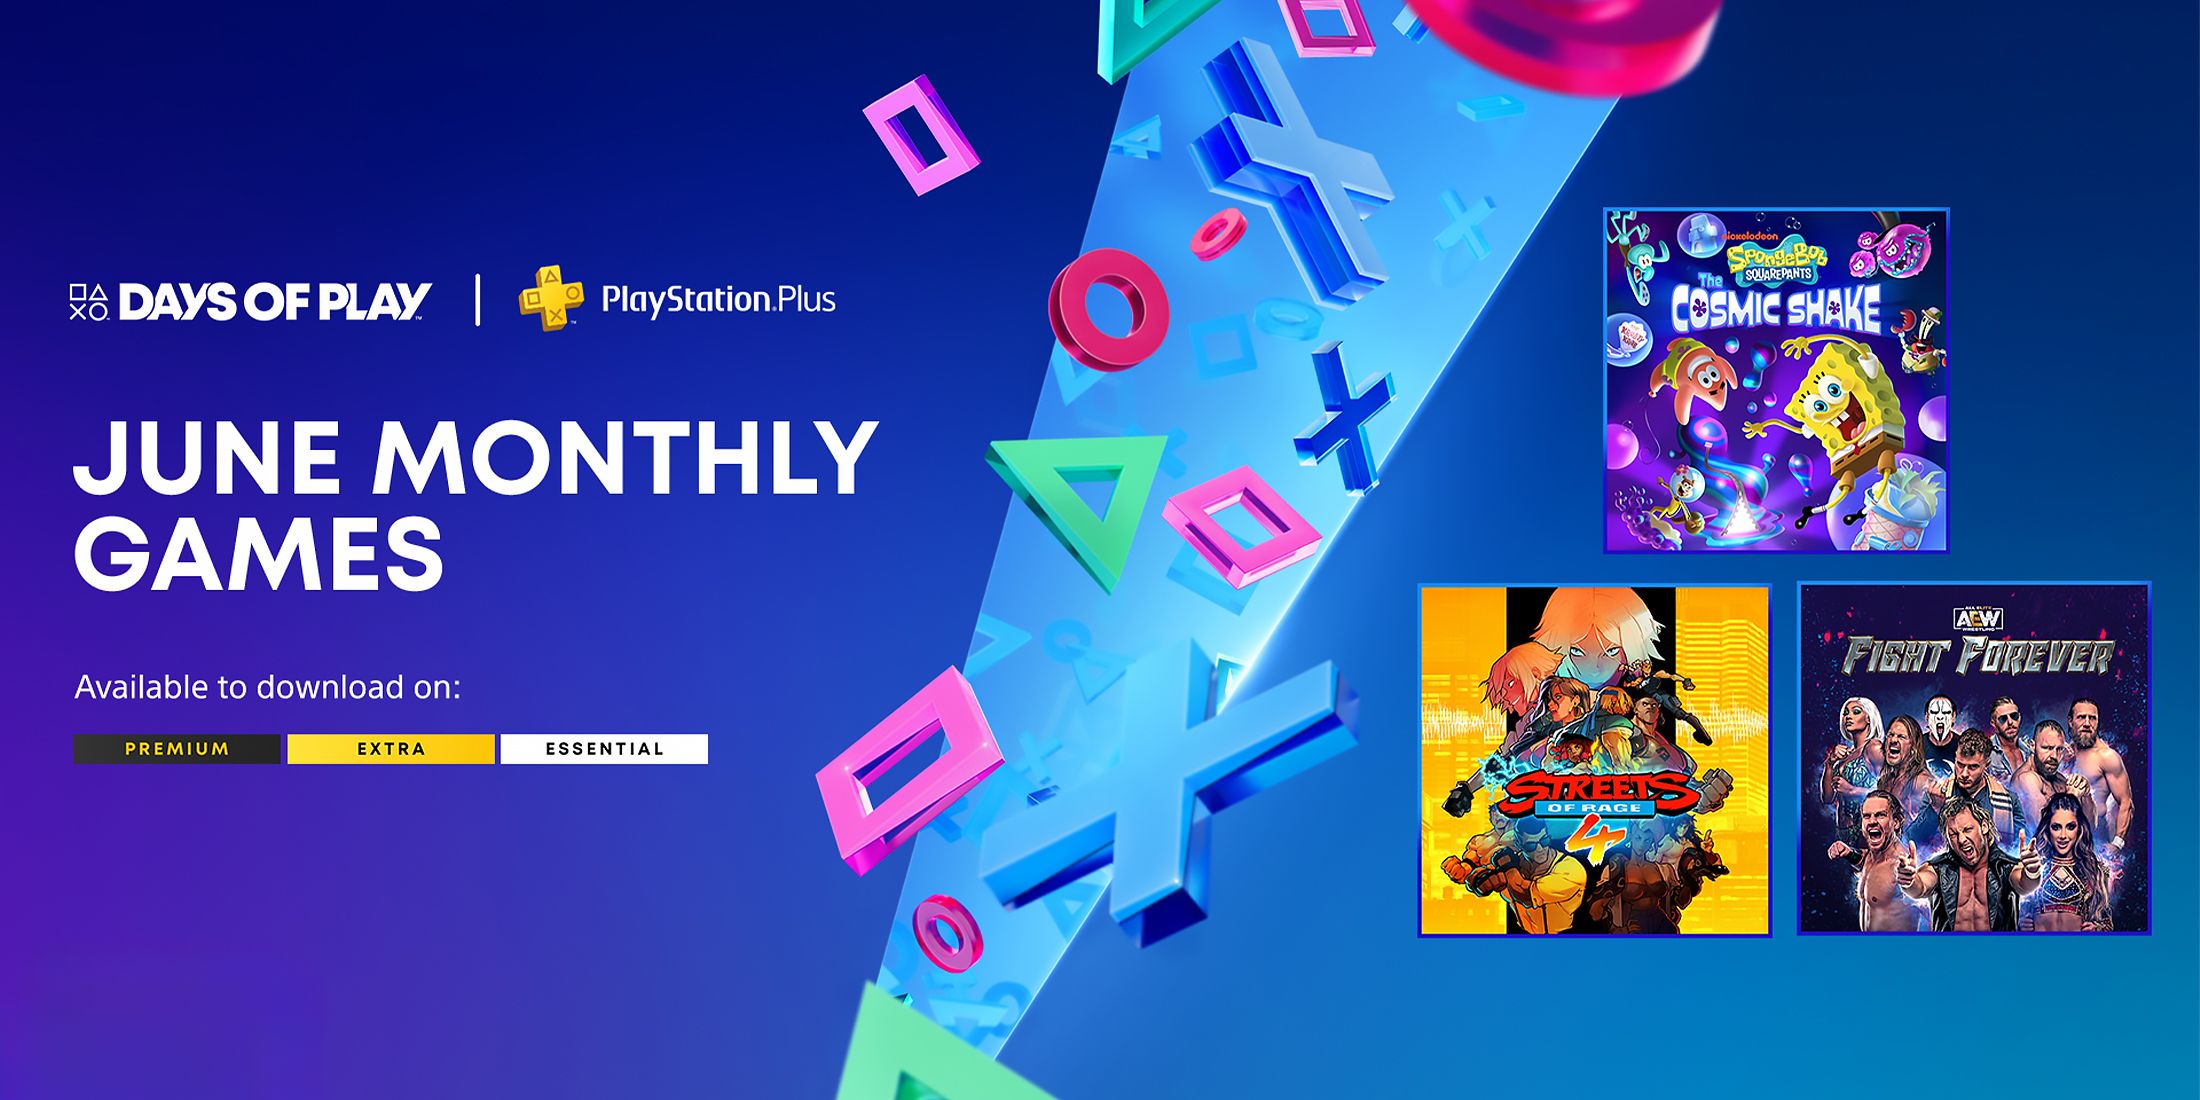 PS Plus June monthly games